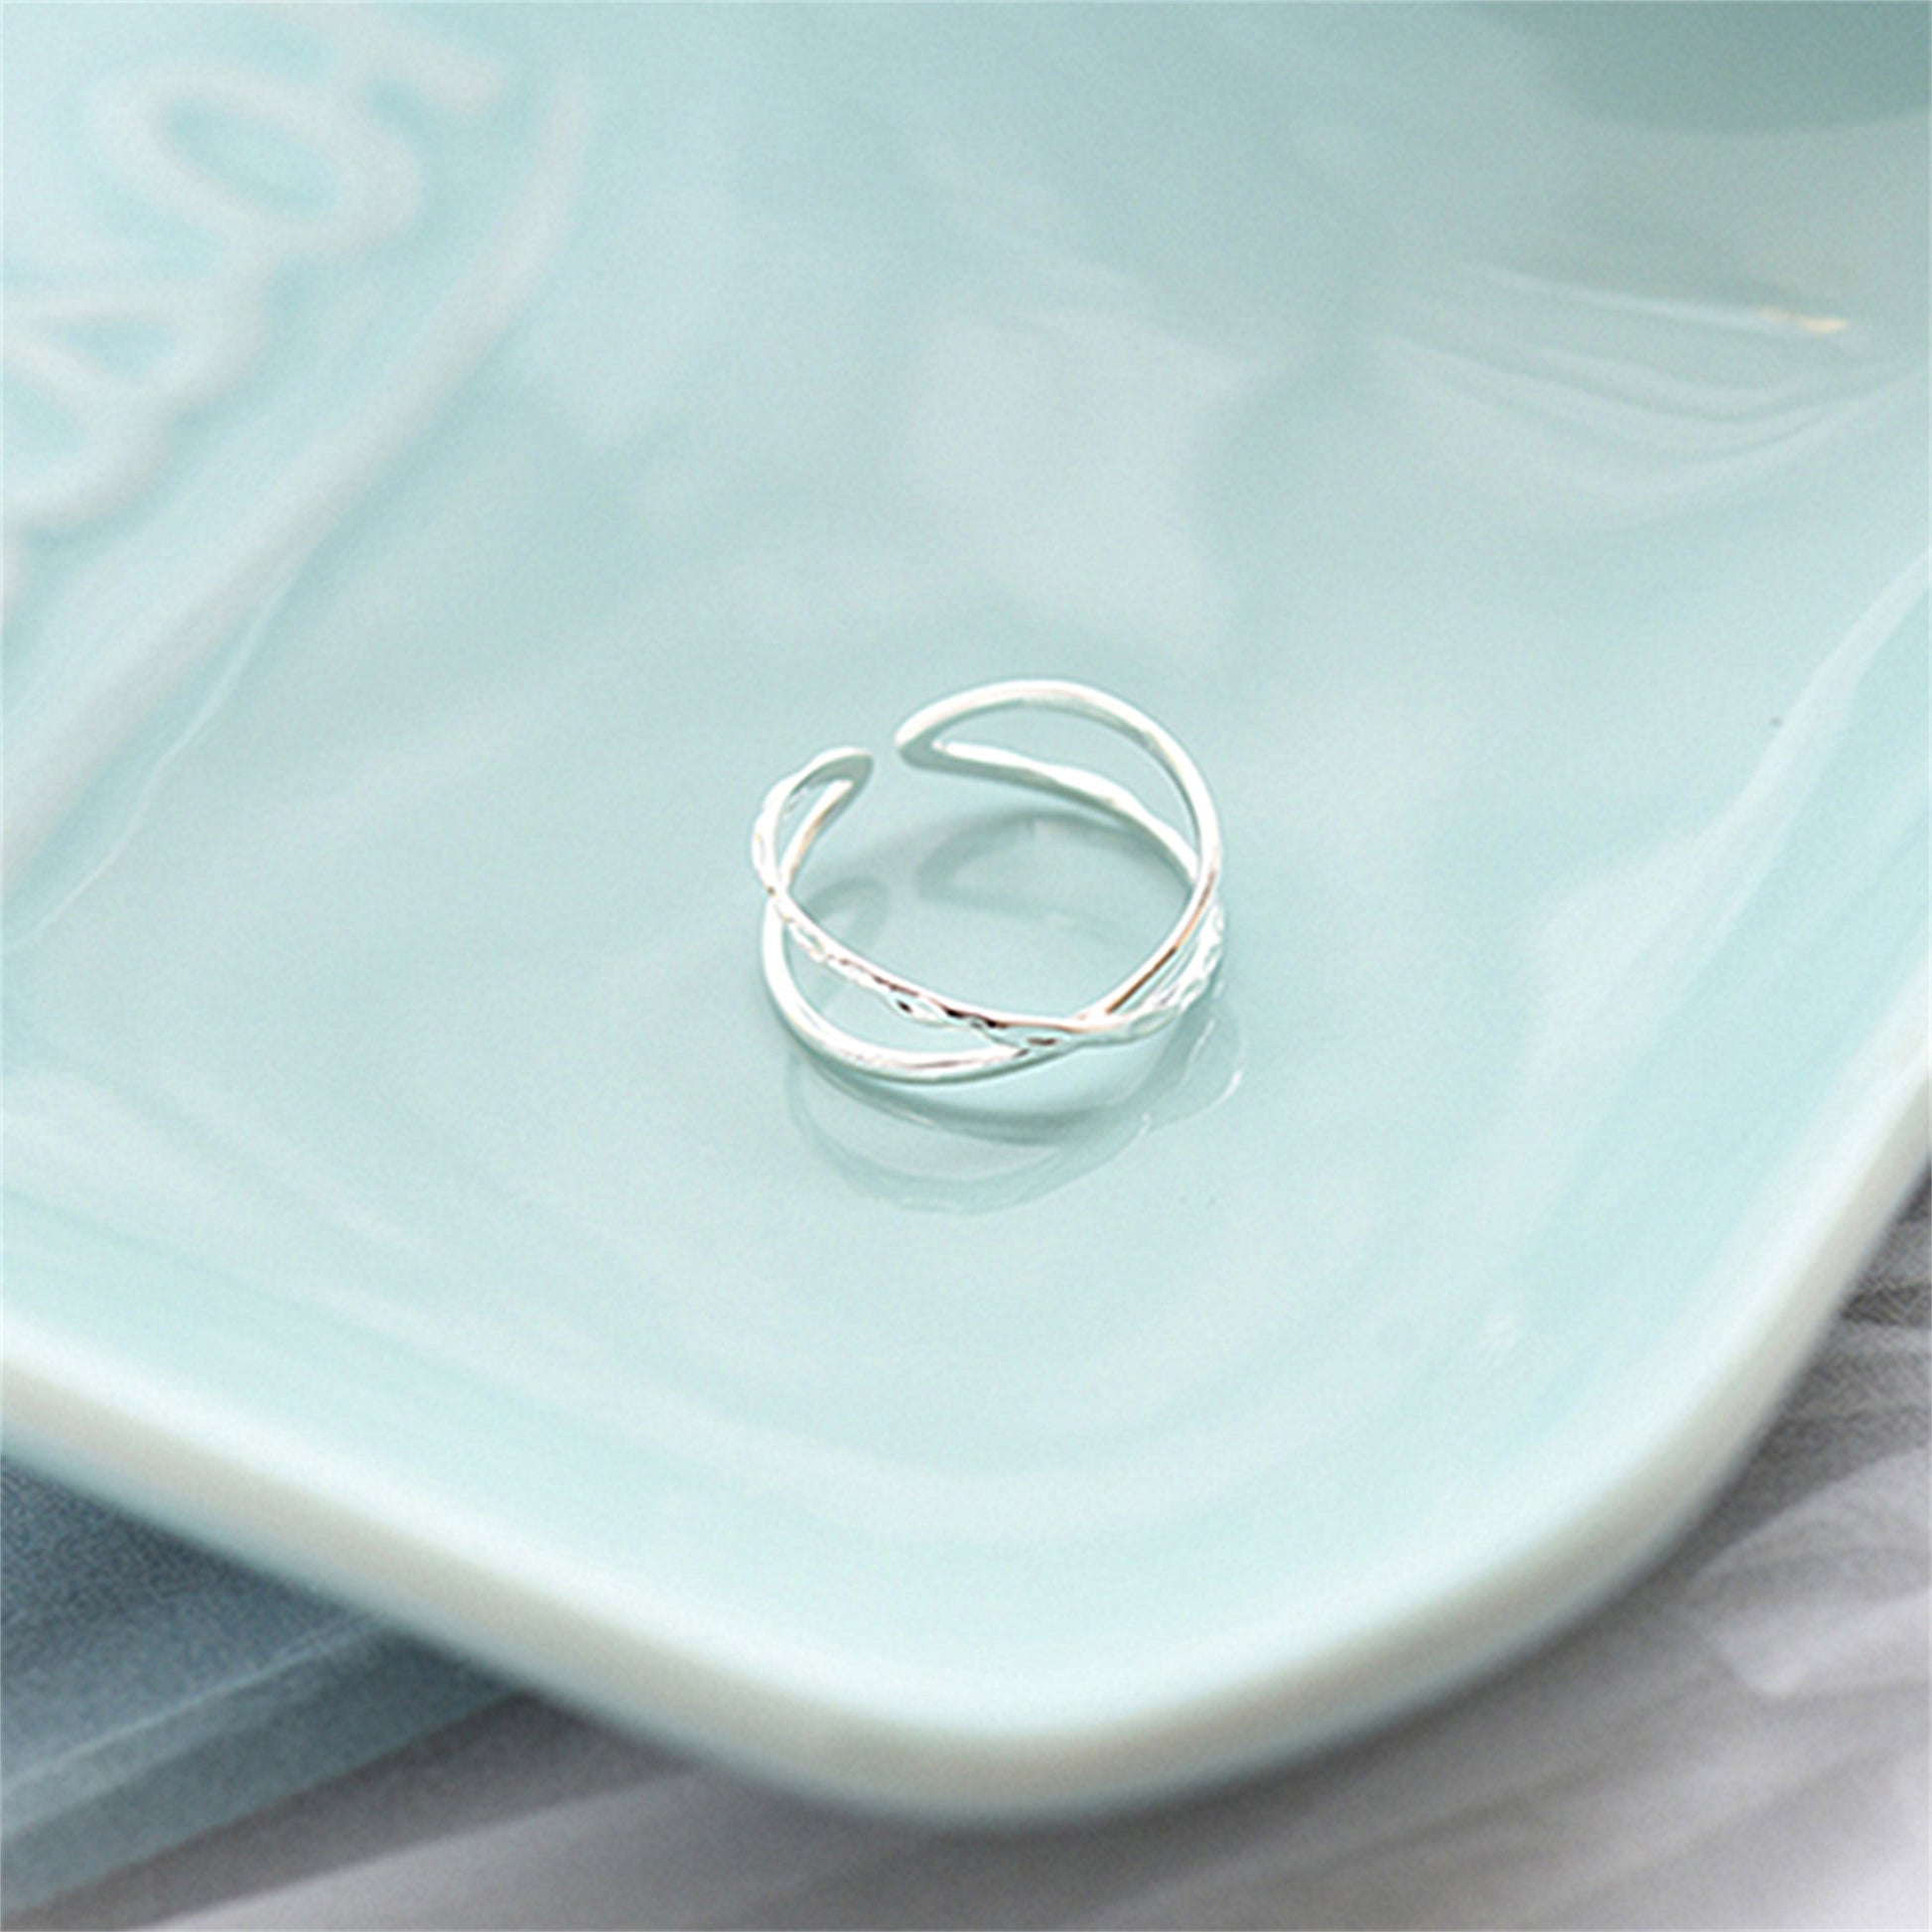 Adjustable Sterling Silver Hammered Cross Ring with Polished Finish - sugarkittenlondon